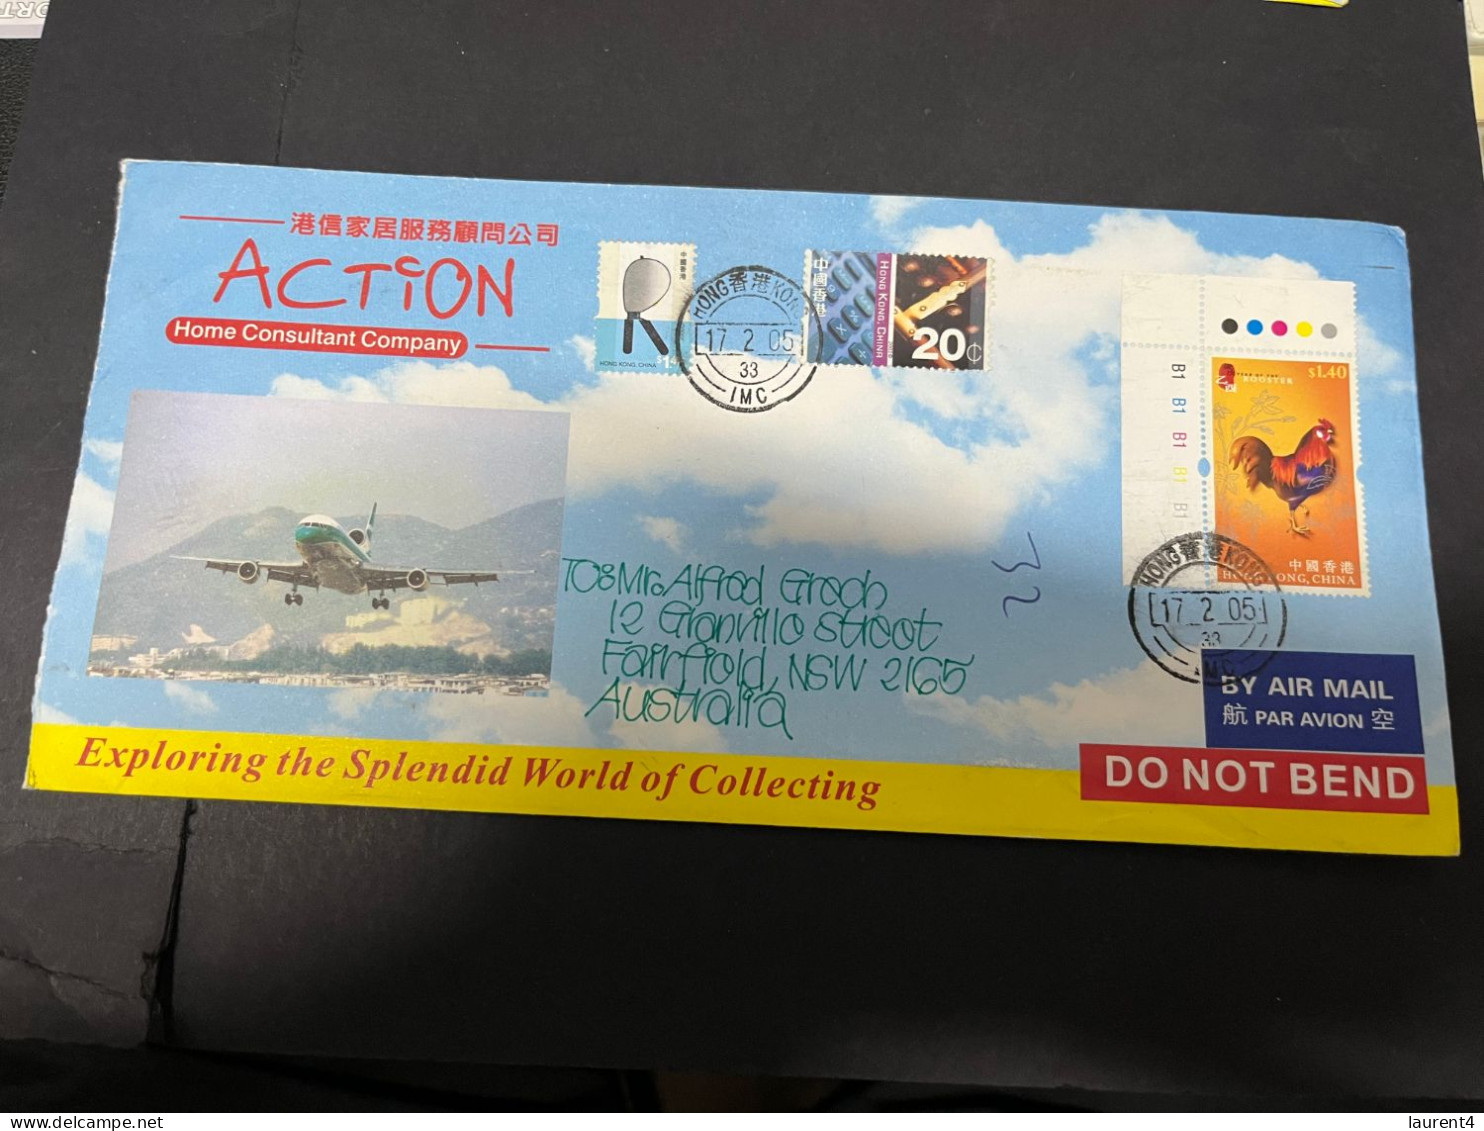 7-1-2024 (3 X 34) Cover Posted From Hong Kong To Australia - 2004 (with Numerous Stamps) CONCORDE Aircraft Back Of Cover - Lettres & Documents